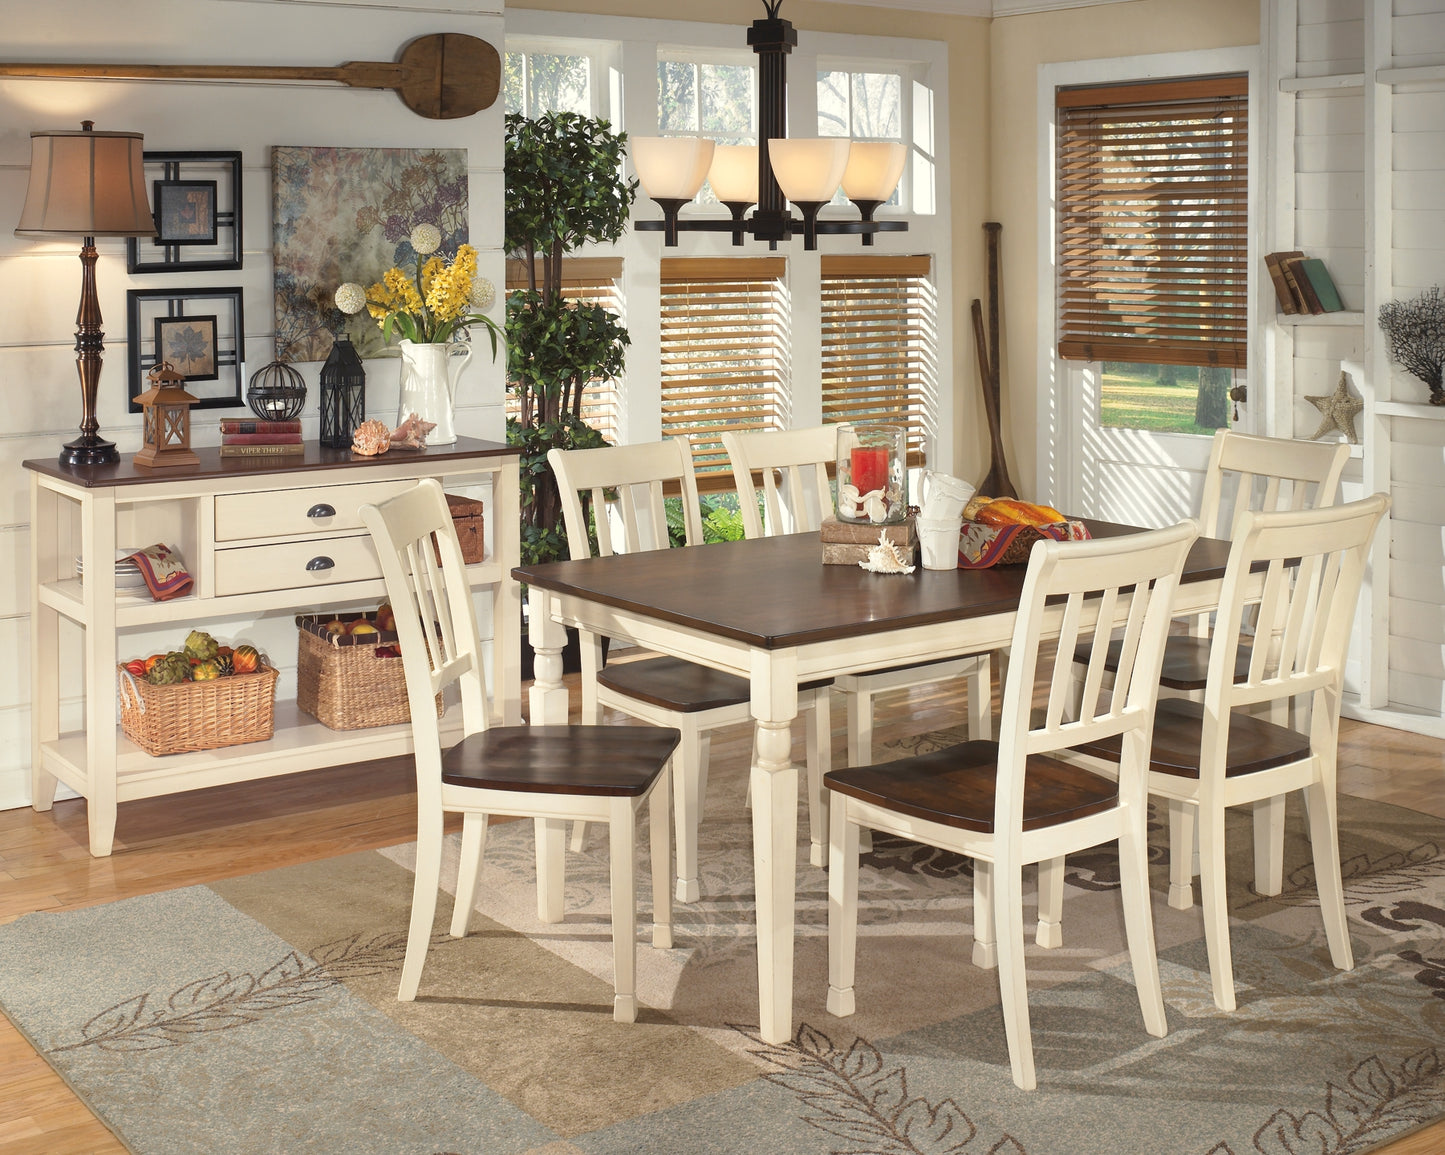 Whitesburg Dining Table and 6 Chairs with Storage Wilson Furniture (OH)  in Bridgeport, Ohio. Serving Moundsville, Richmond, Smithfield, Cadiz, & St. Clairesville